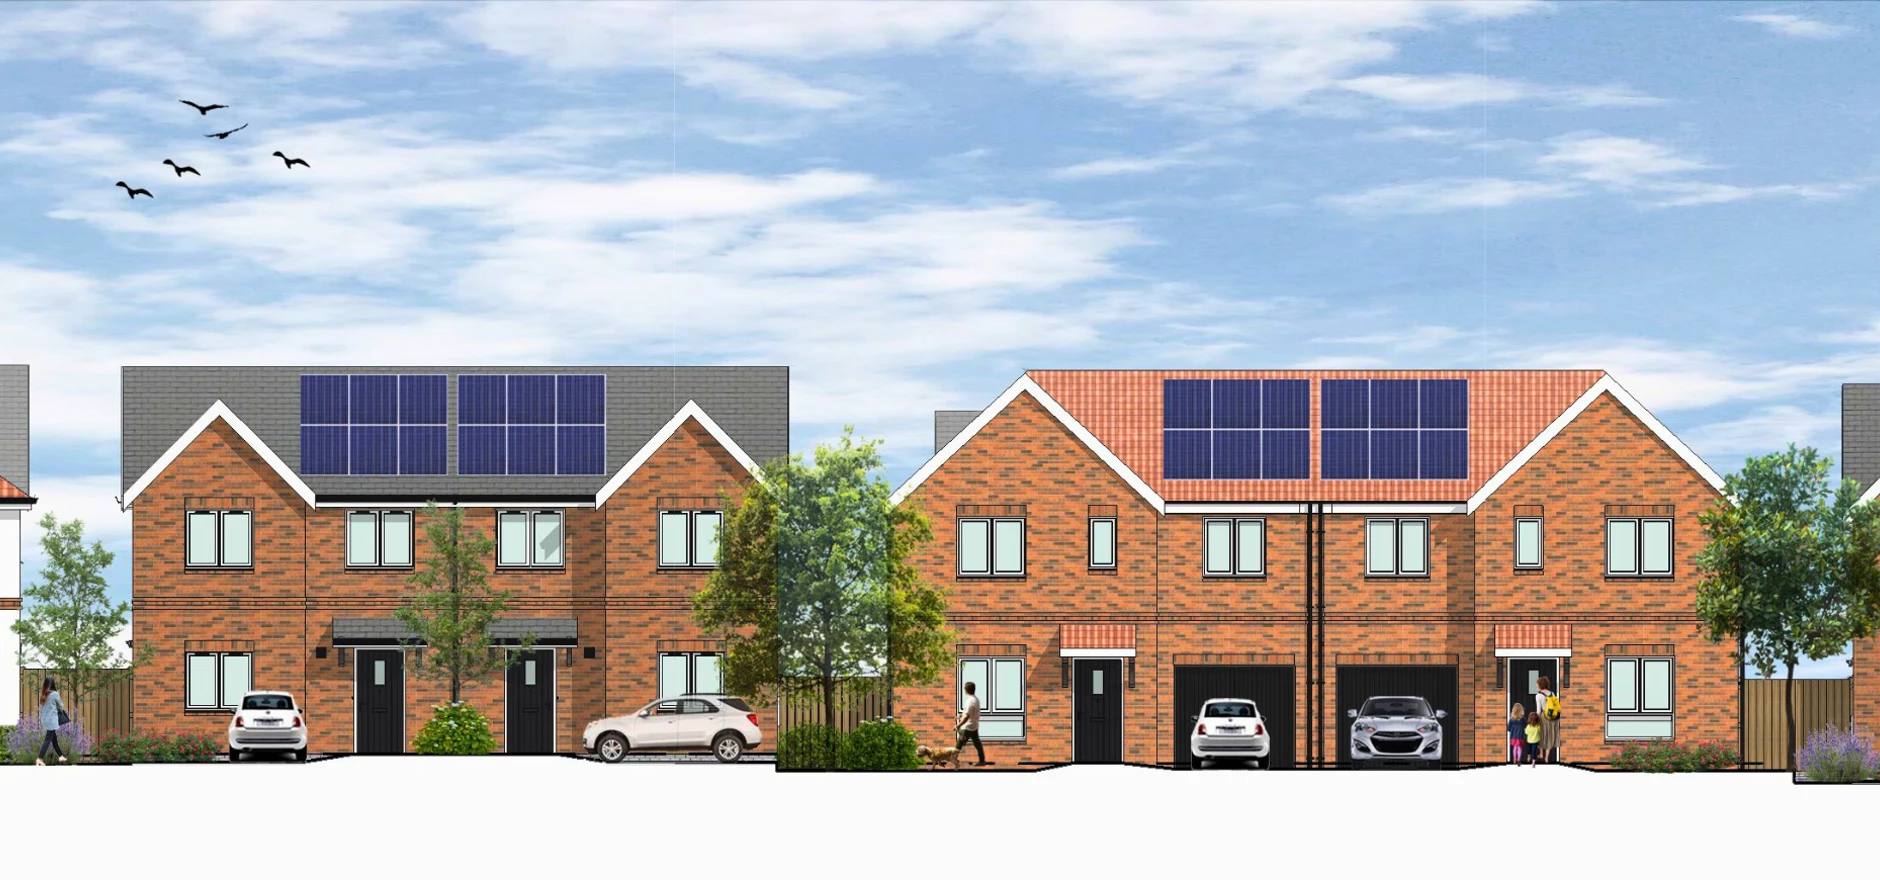 Adderstone Living has secured reserved matters approval for new affordable properties in Hambleton in North Yorkshire